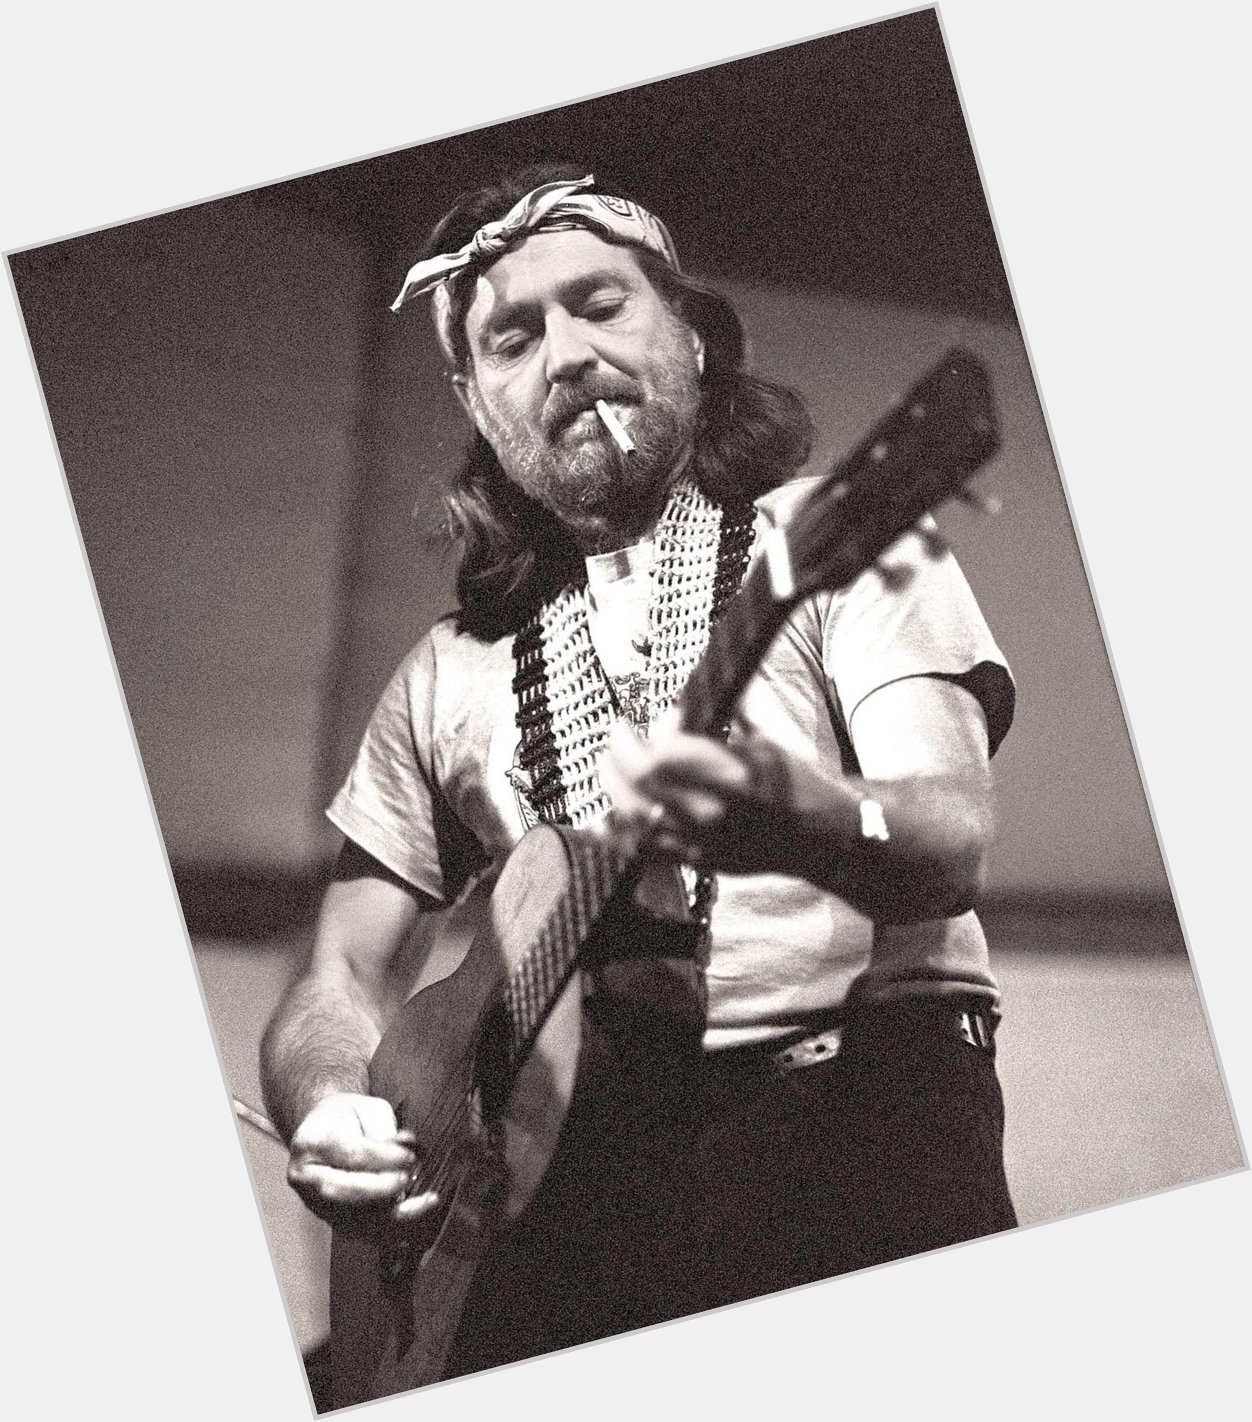 Happy birthday to American musician, actor, and activist Willie Nelson, born April 29, 1933. 